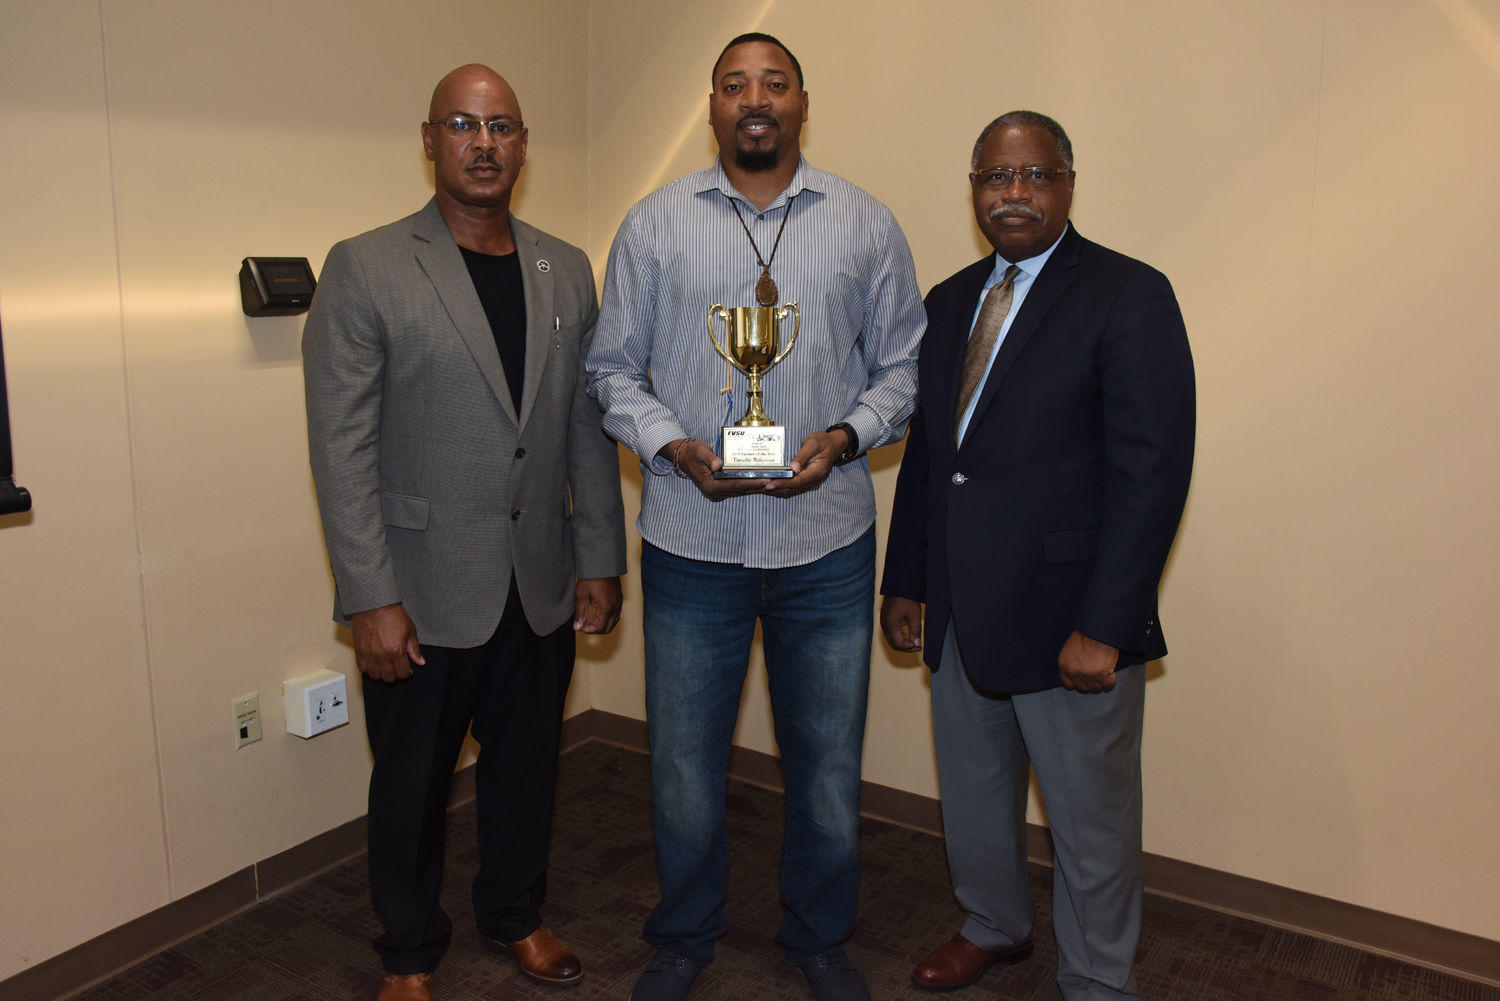 FVSU Dougherty County Extension agent Charlie Grace (Left) and Dr. Mark Latimore Jr., FVSU Extension administrator (Right) stand with Timothy Robinson (center) as he shows off his 2018 Fort Valley State University Farm Family of the Year trophy during the 41st Farm, Home and Ministers Conference.